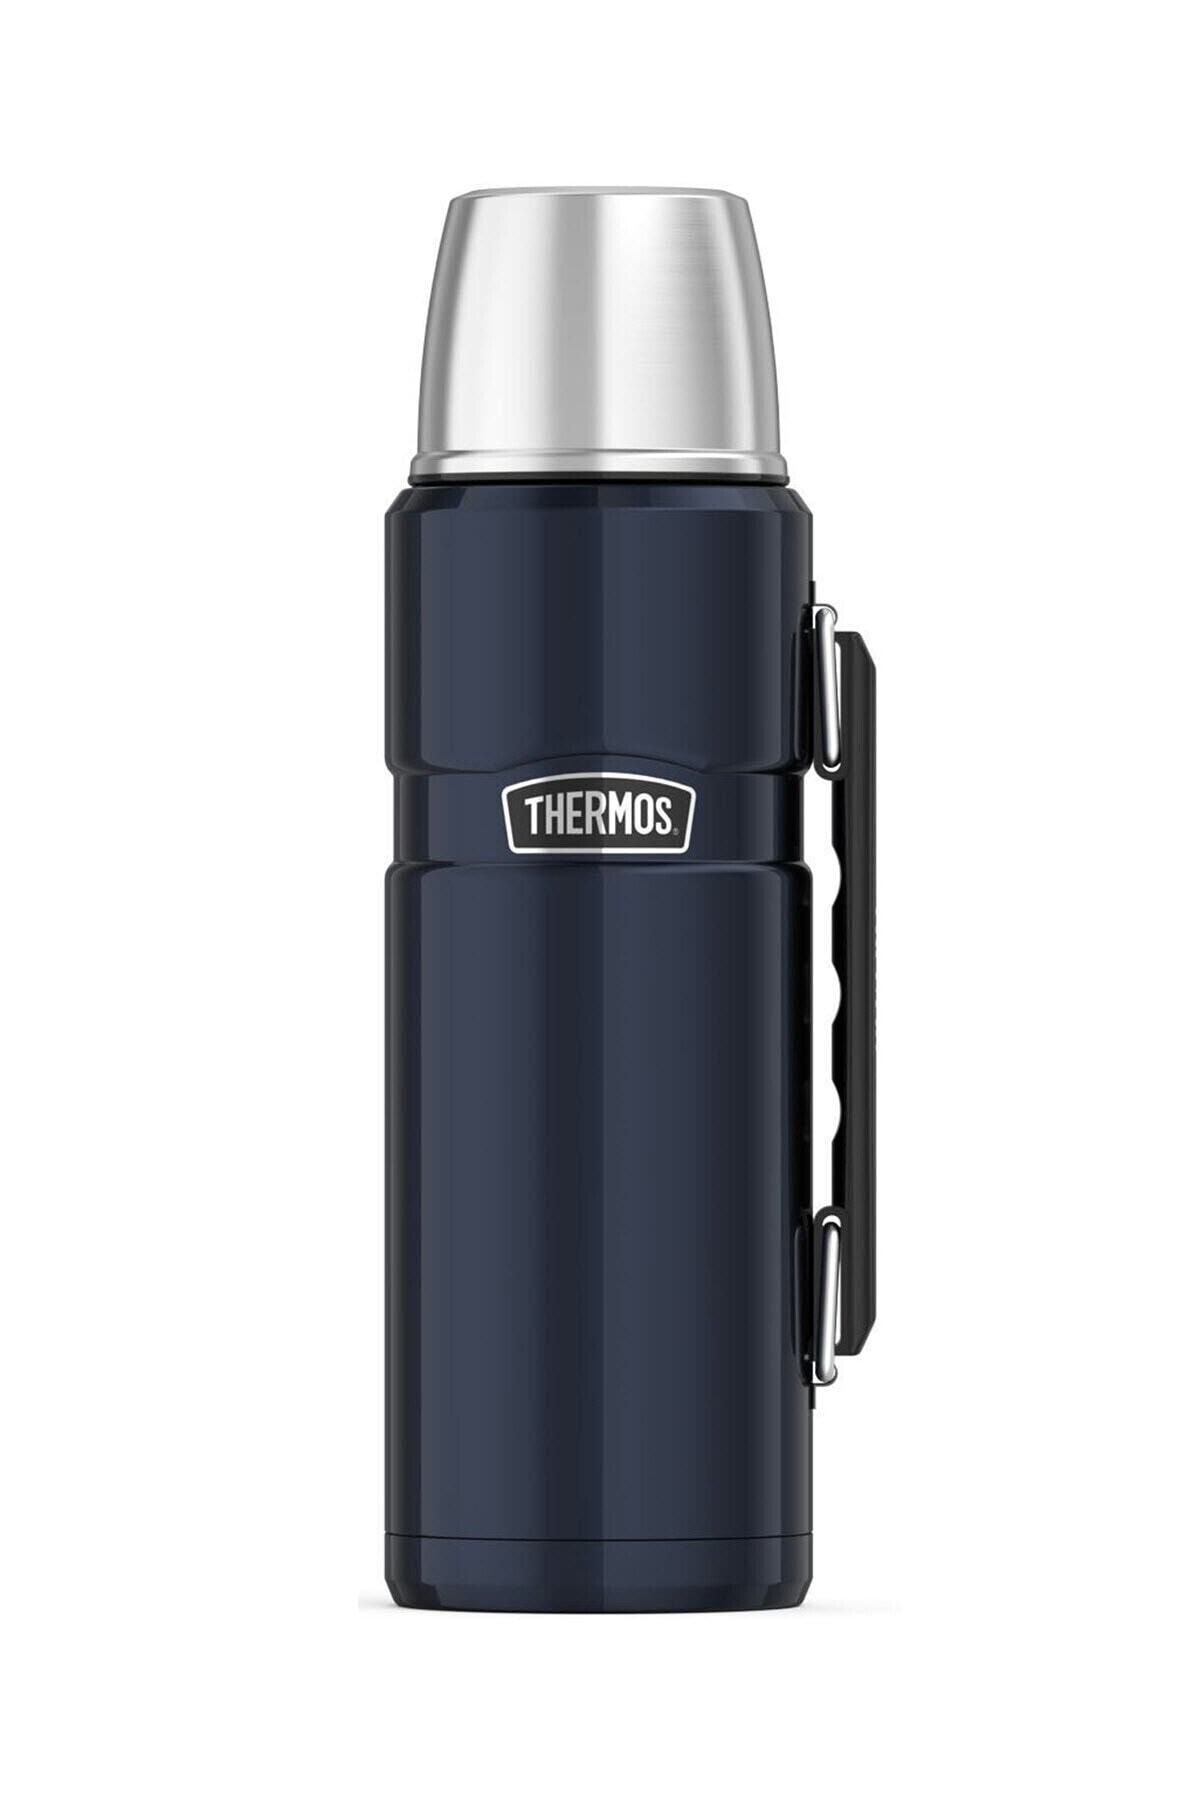 Thermos Sk2010 Stainless King Large 1.2 Lt (MİDNİGHT BLUE)